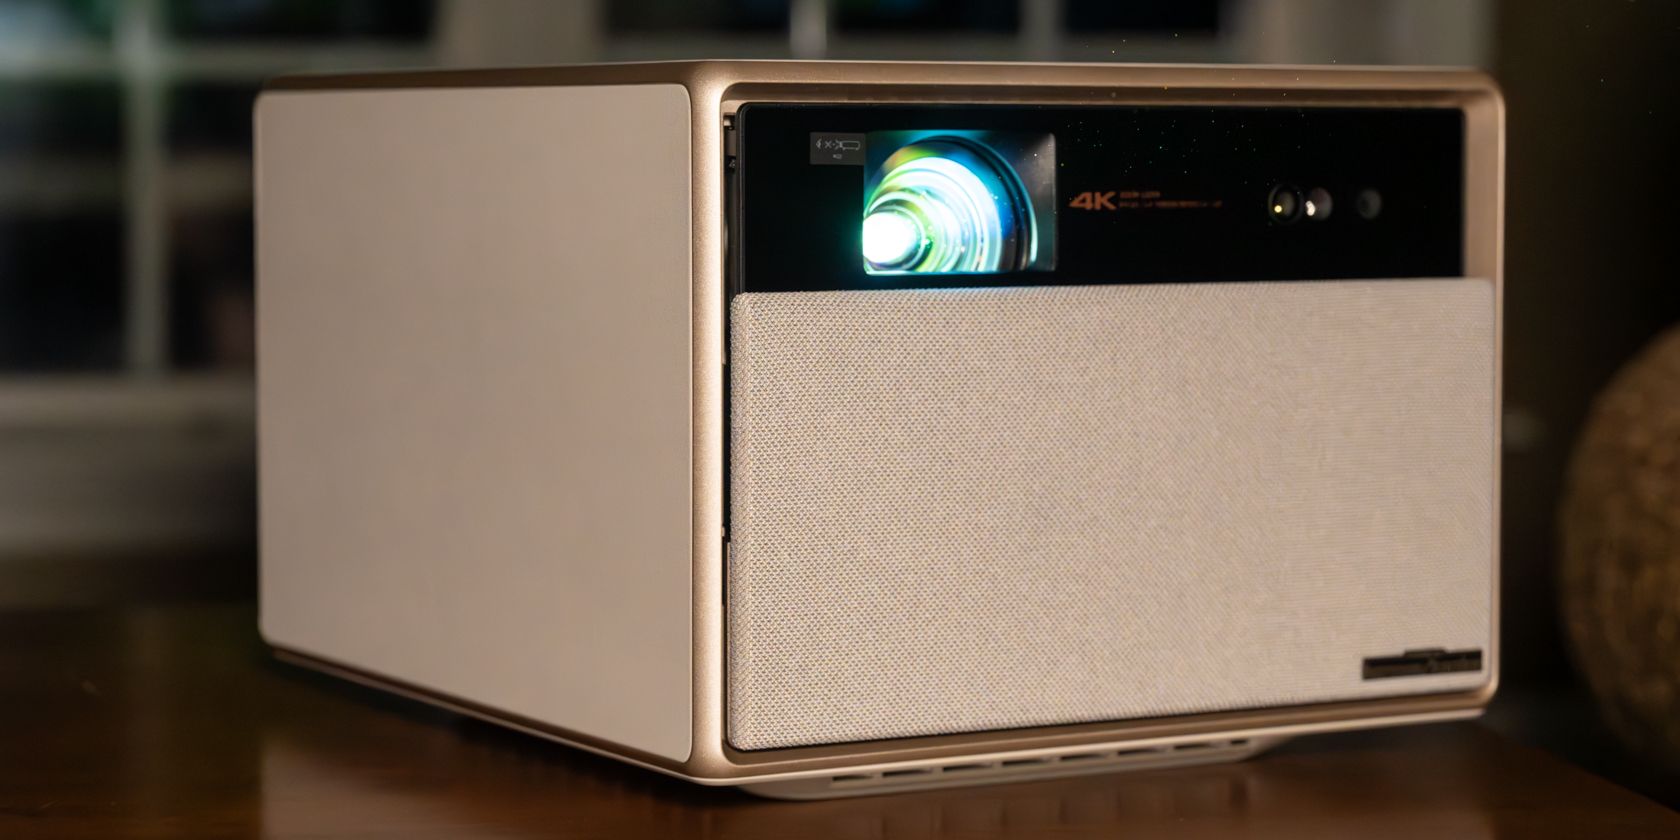 XGIMI Horizon Ultra Review: A Beautiful Dolby Vision Projector That Adapts  to Any Room